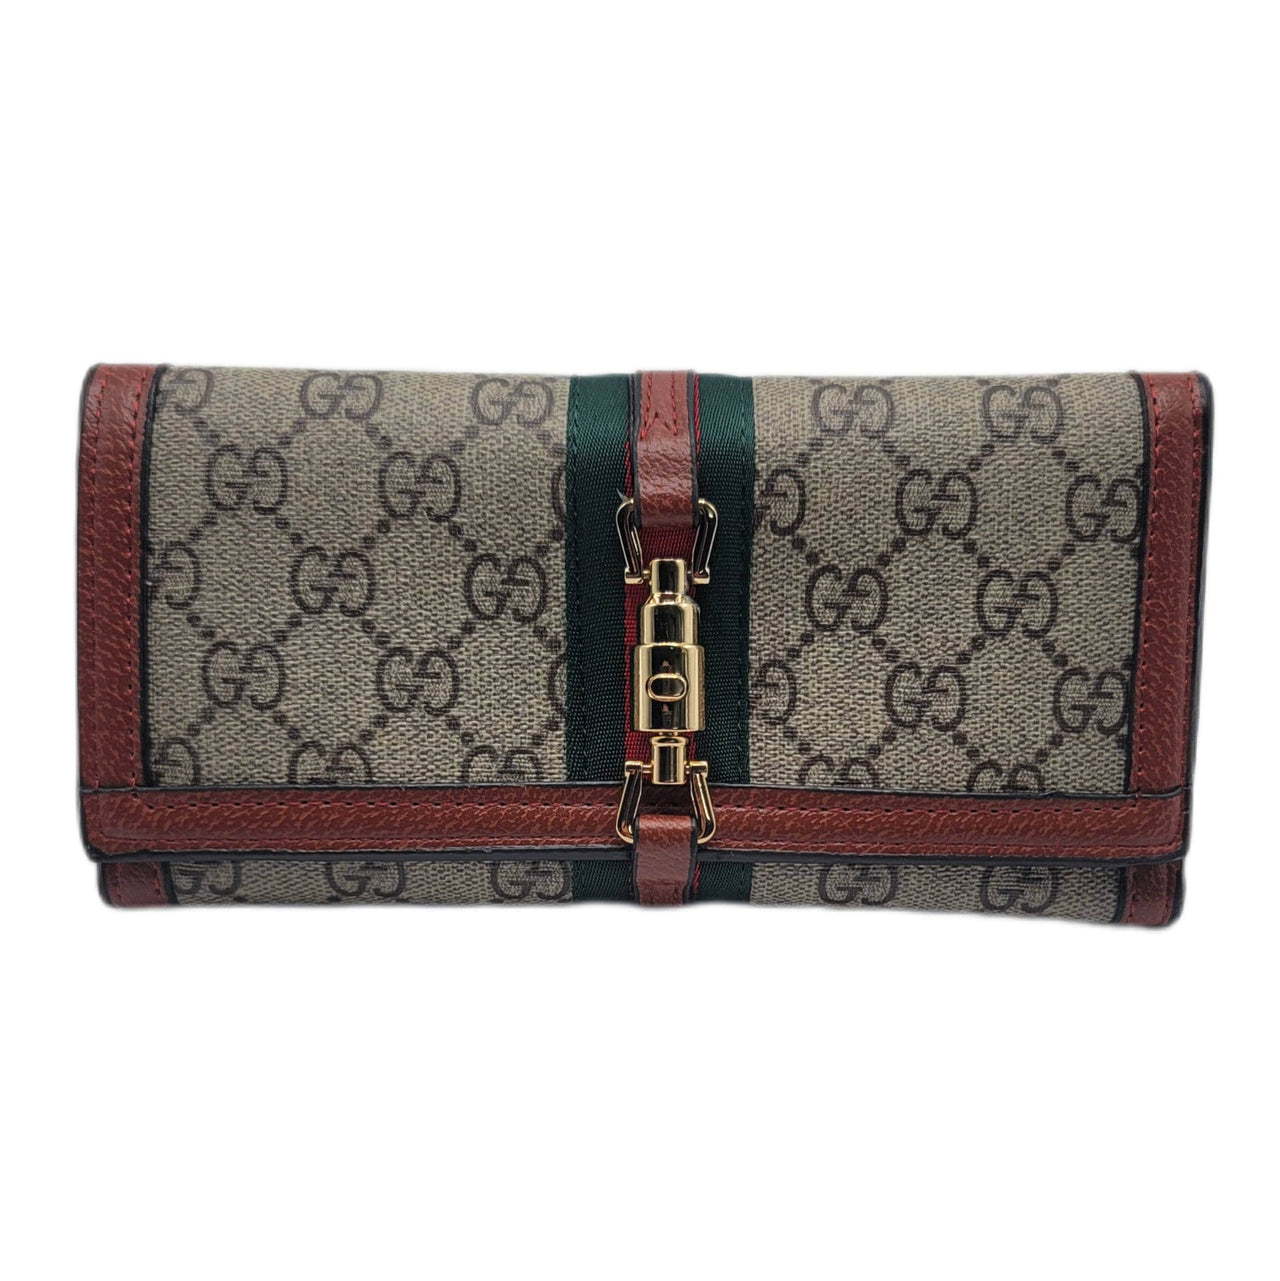 The Bag Couture Luggage & Bags Gucci 3 Fold Wallet BR